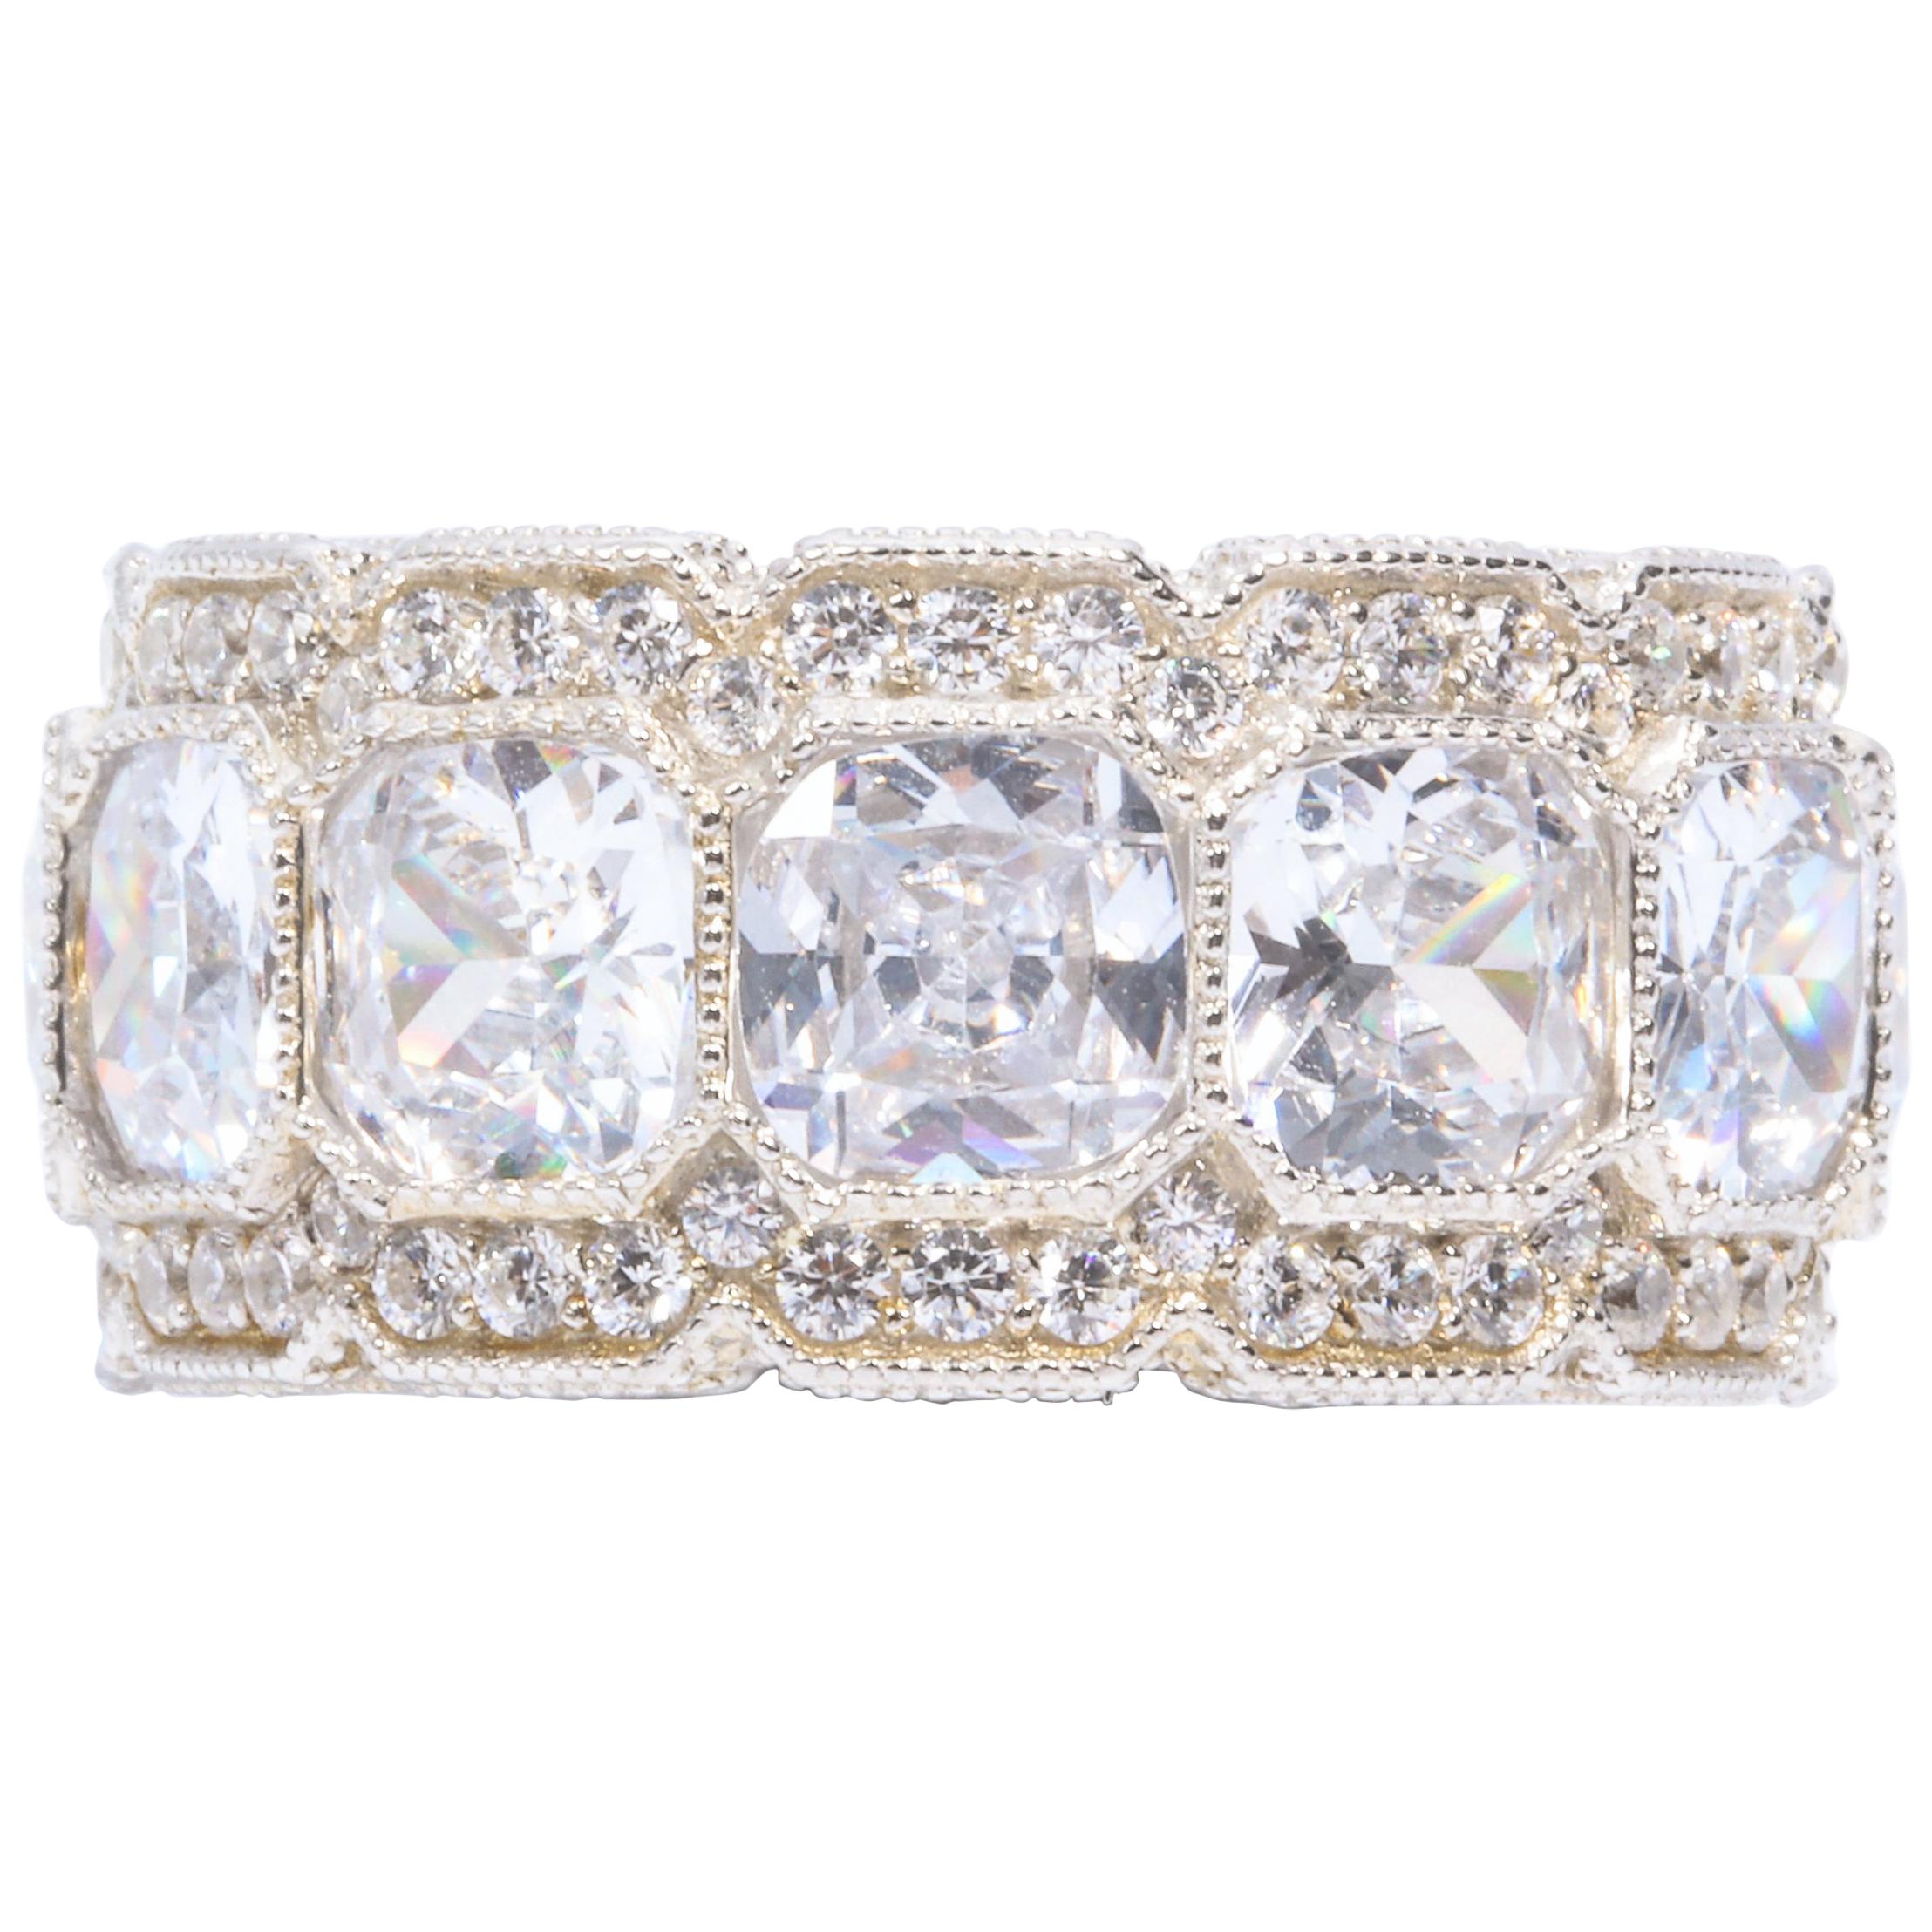 Stunning White Micropave Cubic Zirconia Half Inch Wide Band